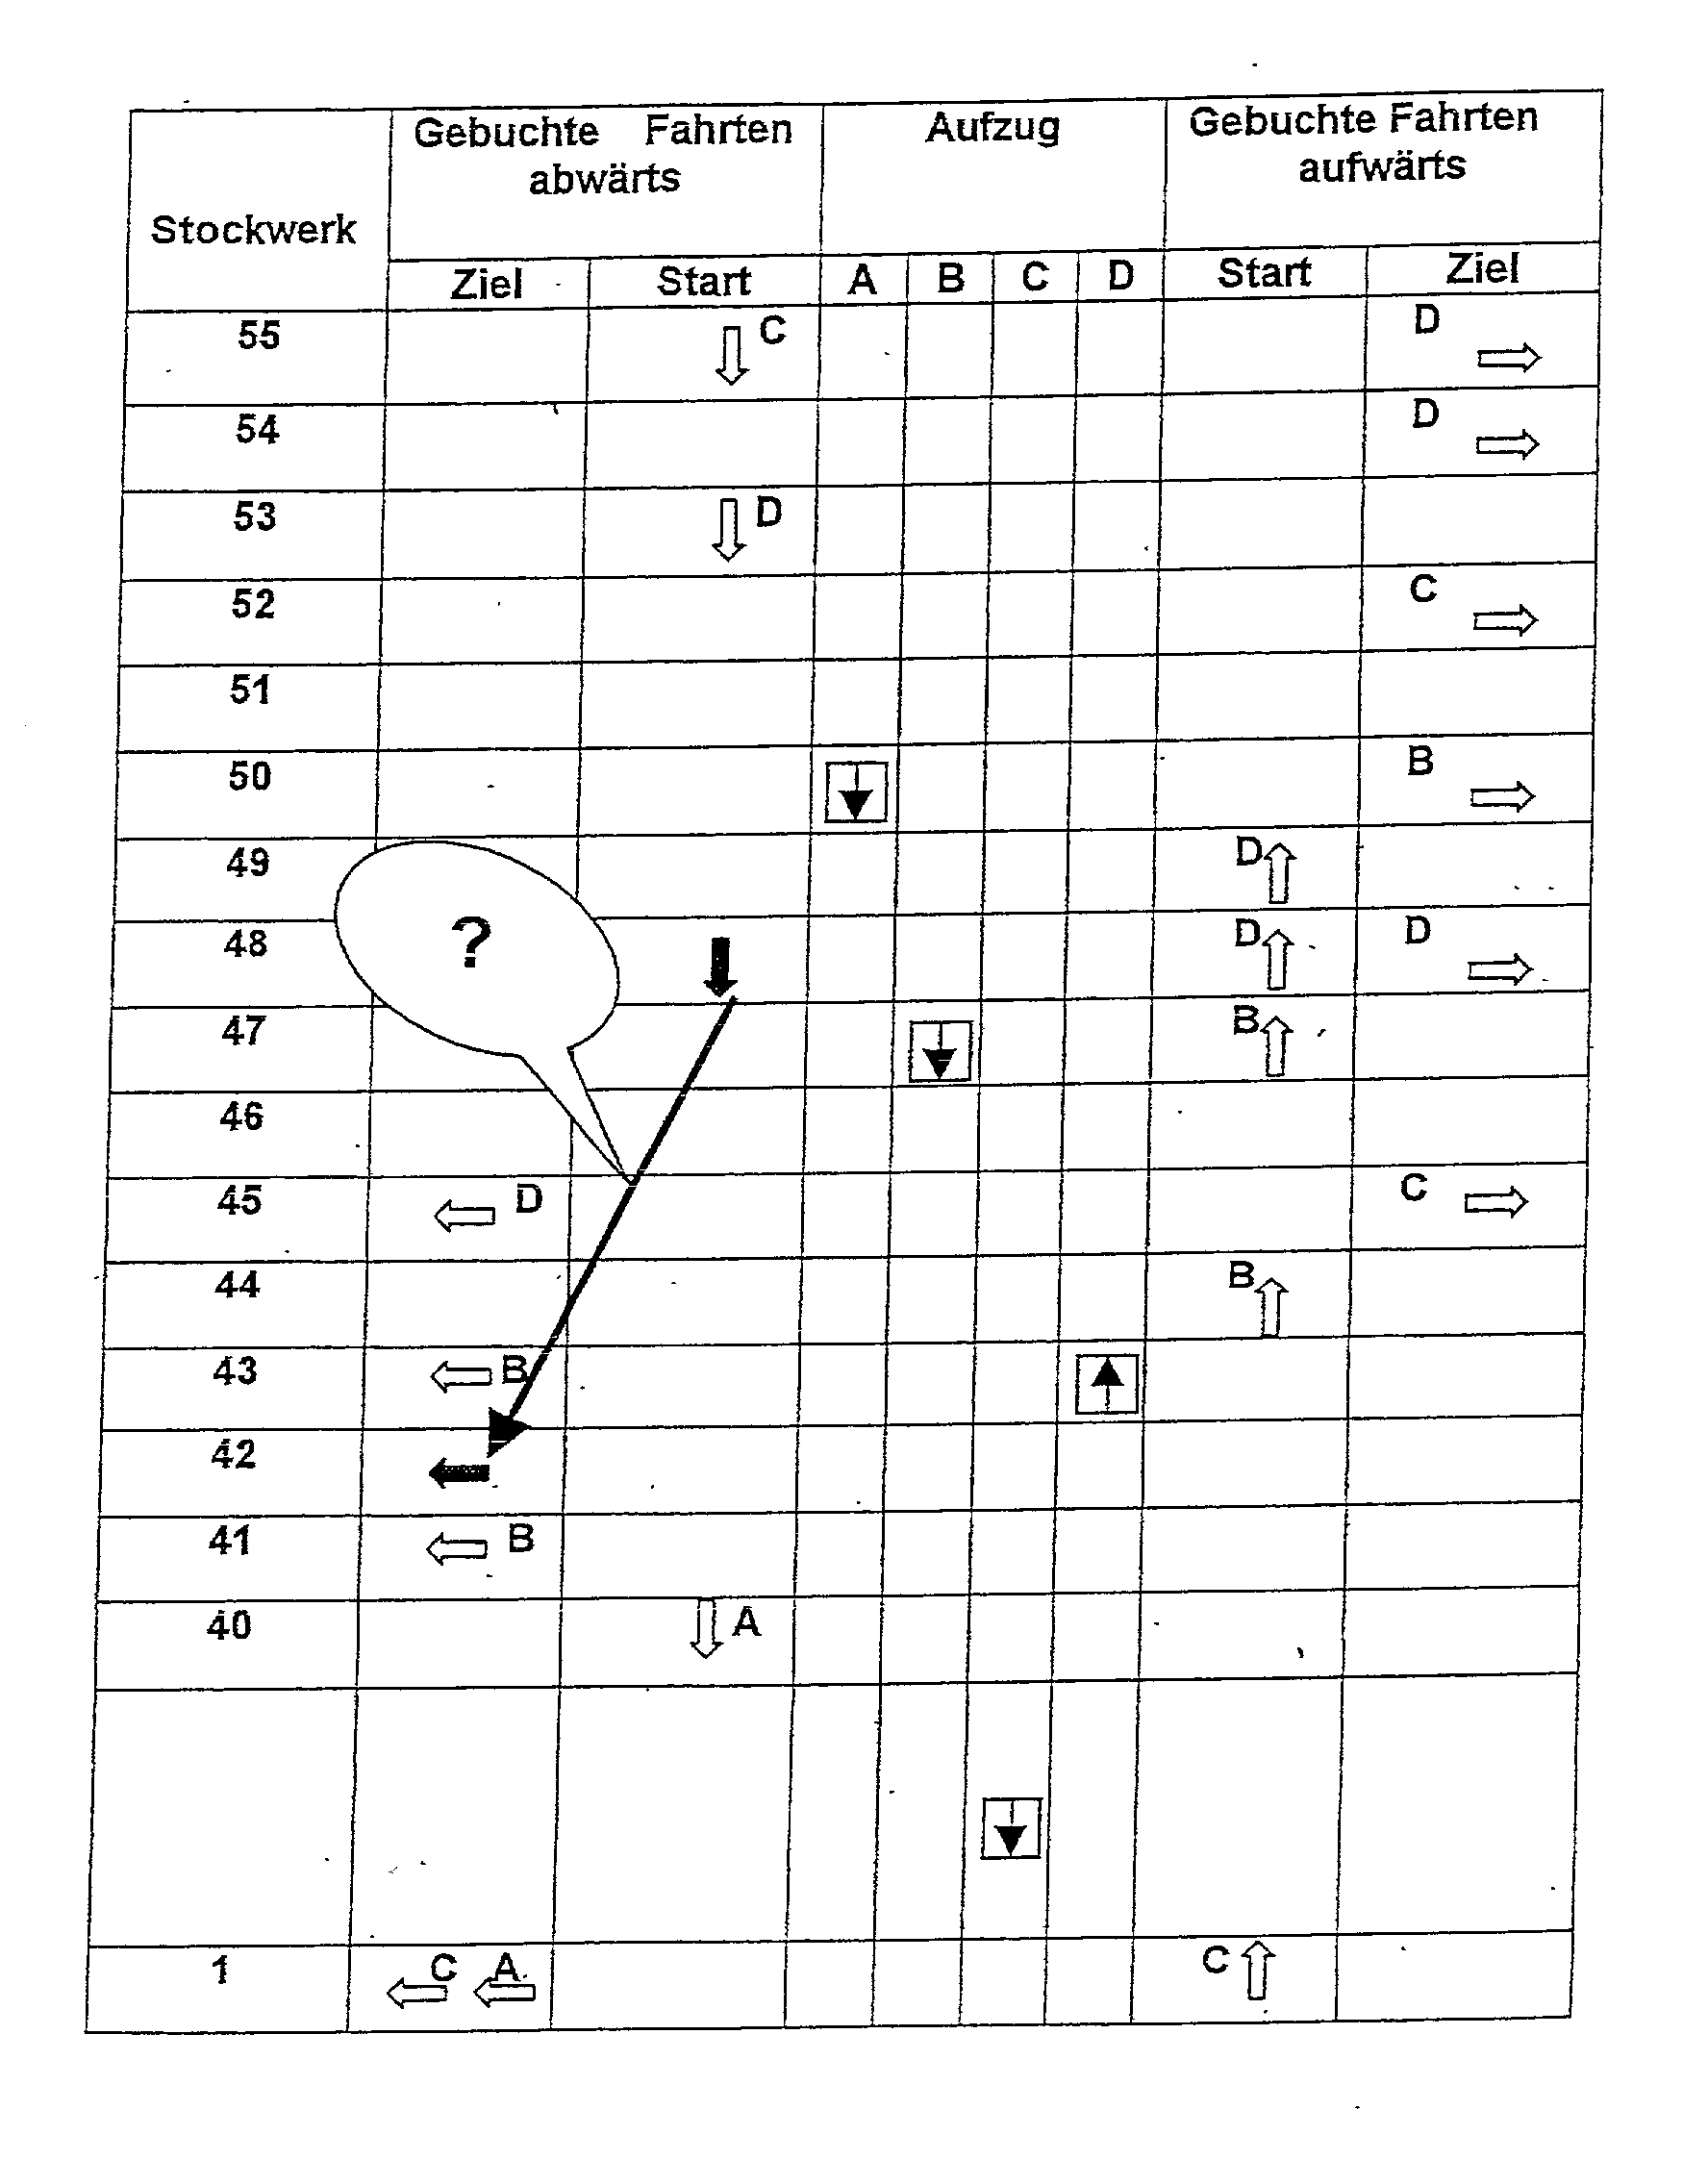 Method of allocating elevator cars to operating groups of a destination call control